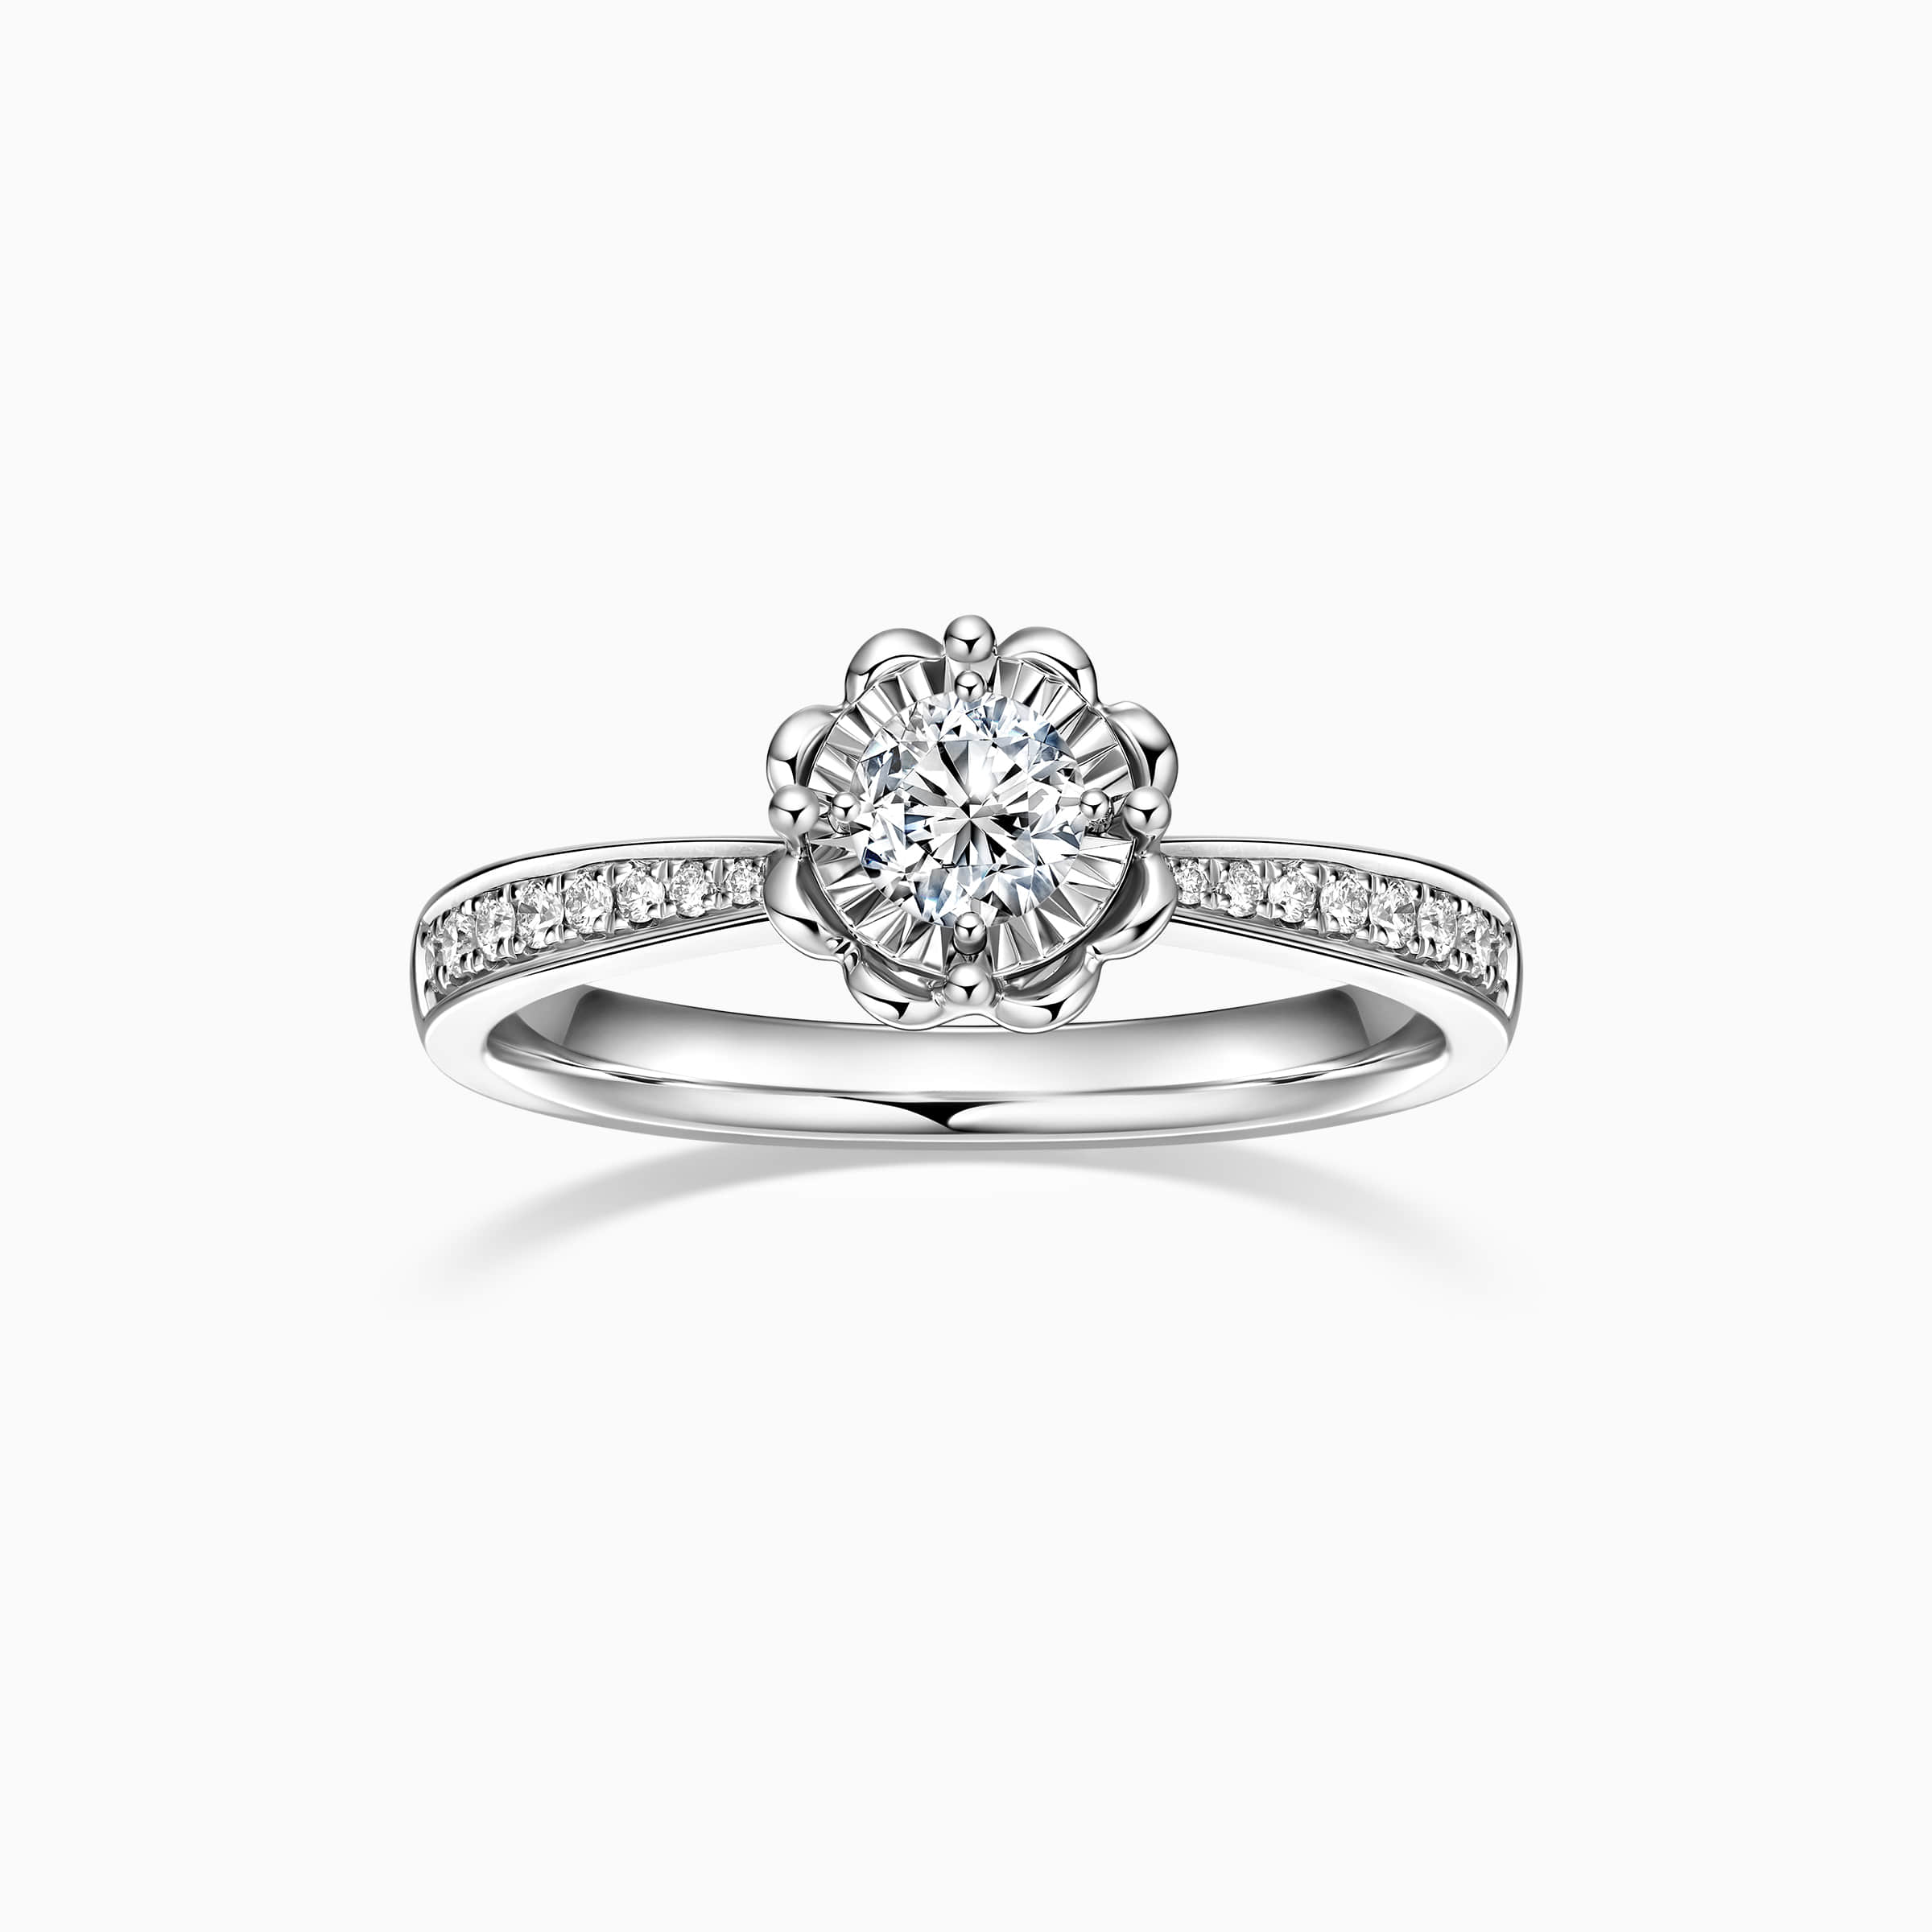 Darry Ring flower shaped engagement ring front view